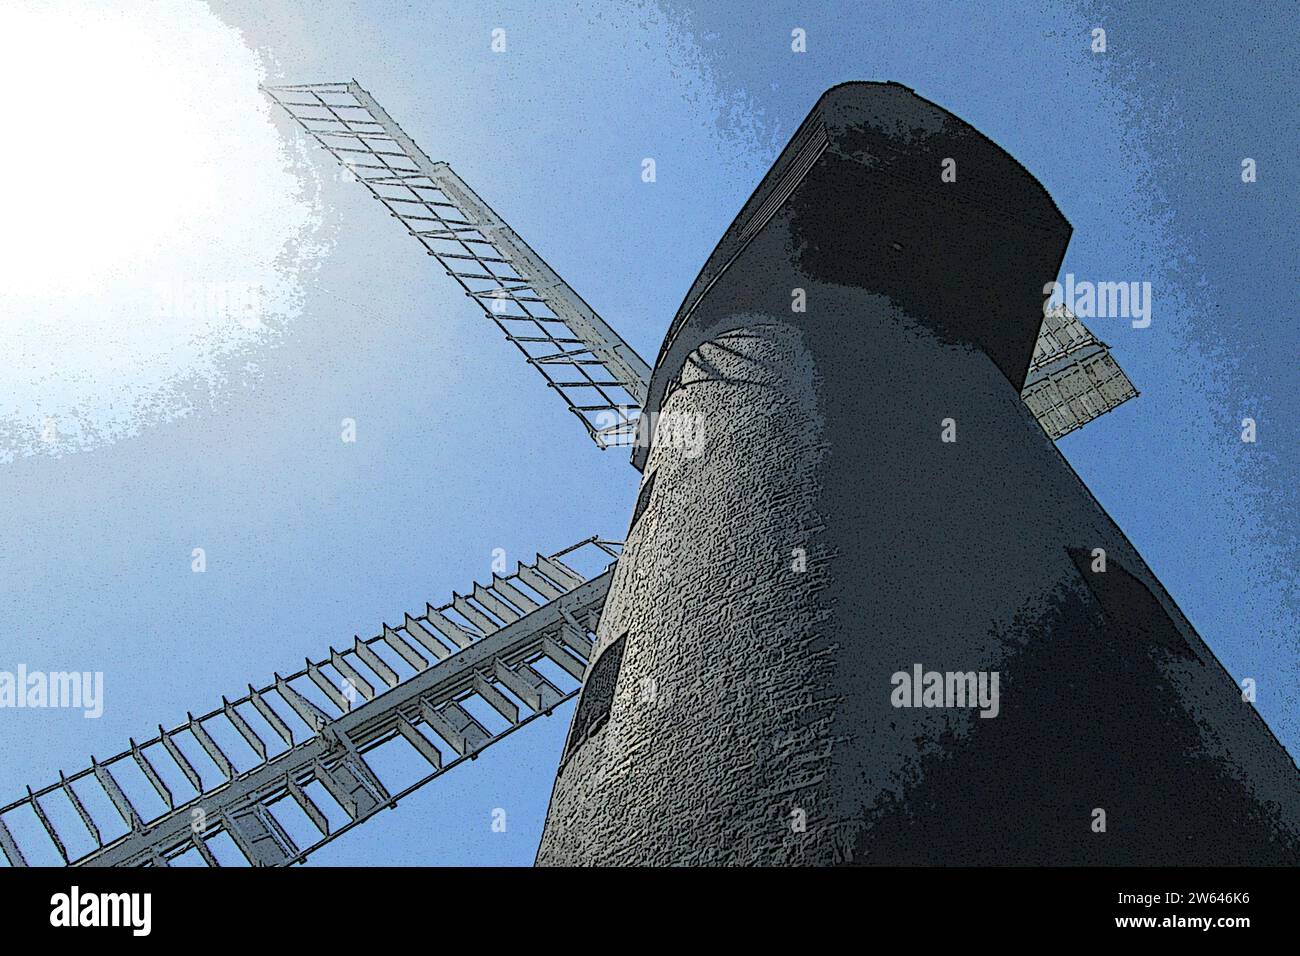 Brixton Windmill (built 1816)  also known as Ashby's Mill, London Borough of Lambeth, close up of the brick tower and sails, digital illustration art Stock Photo